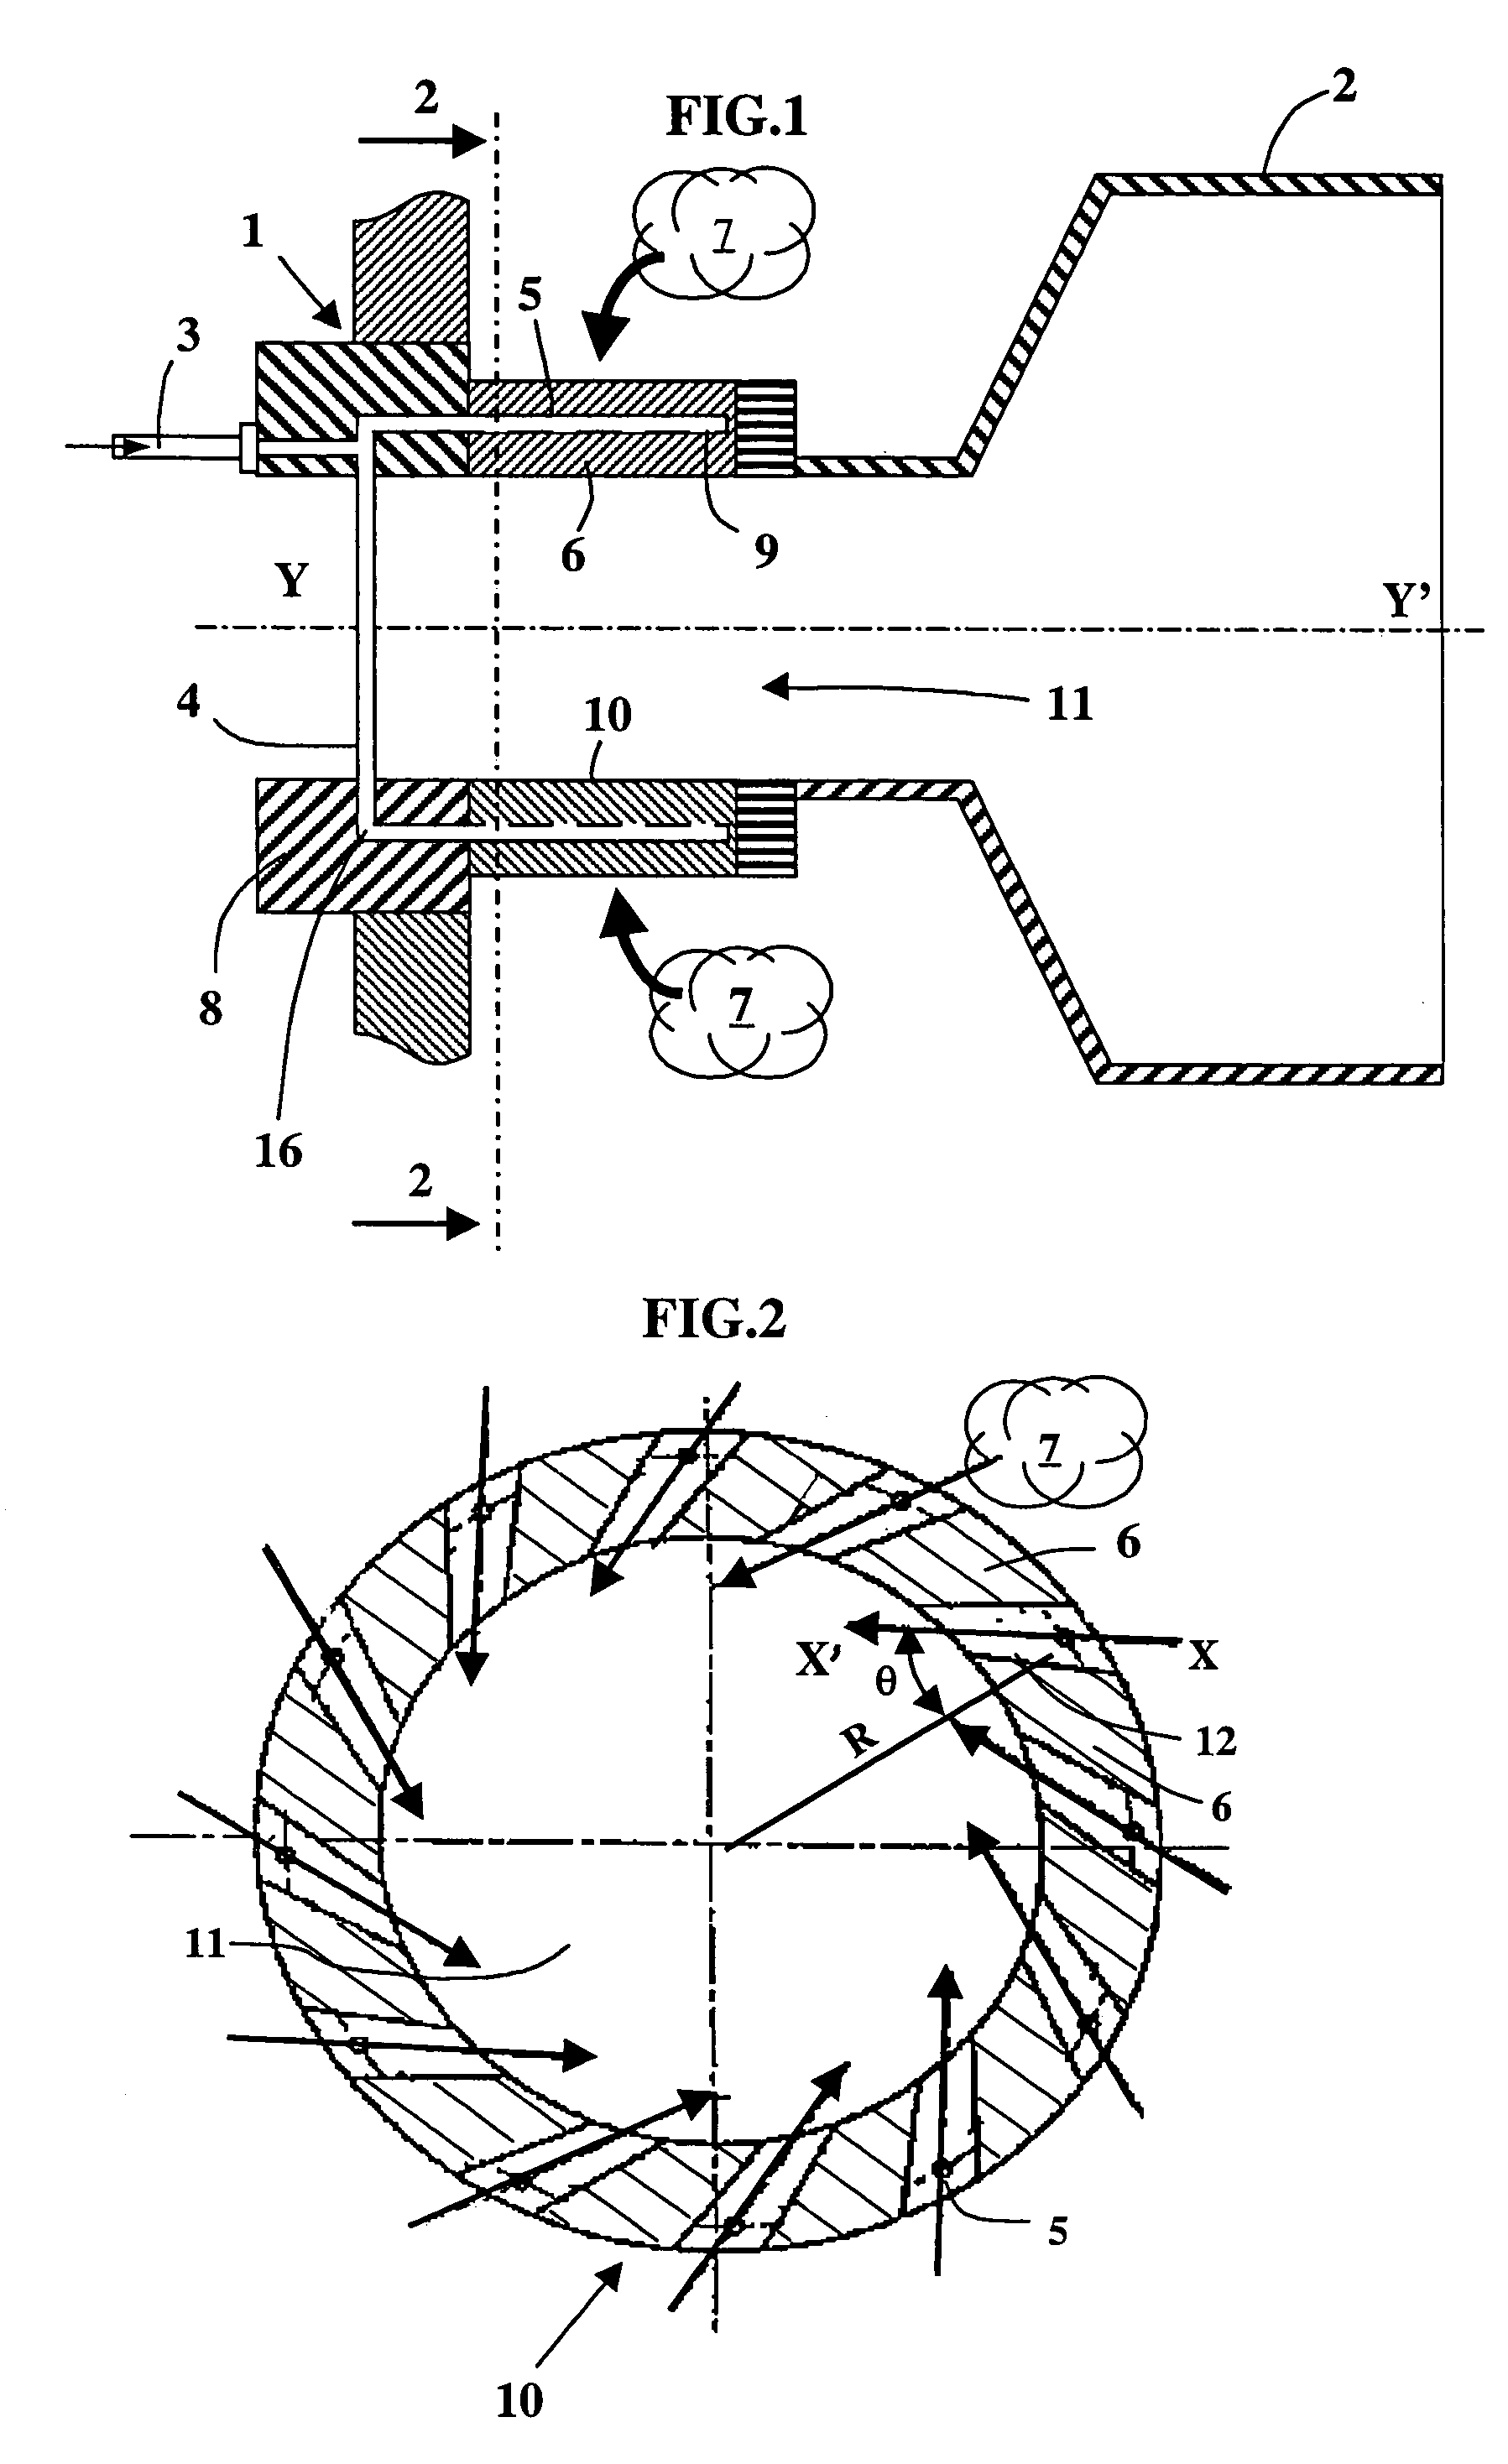 Device and method for injecting a liquid fuel into an air flow for a combustion chamber